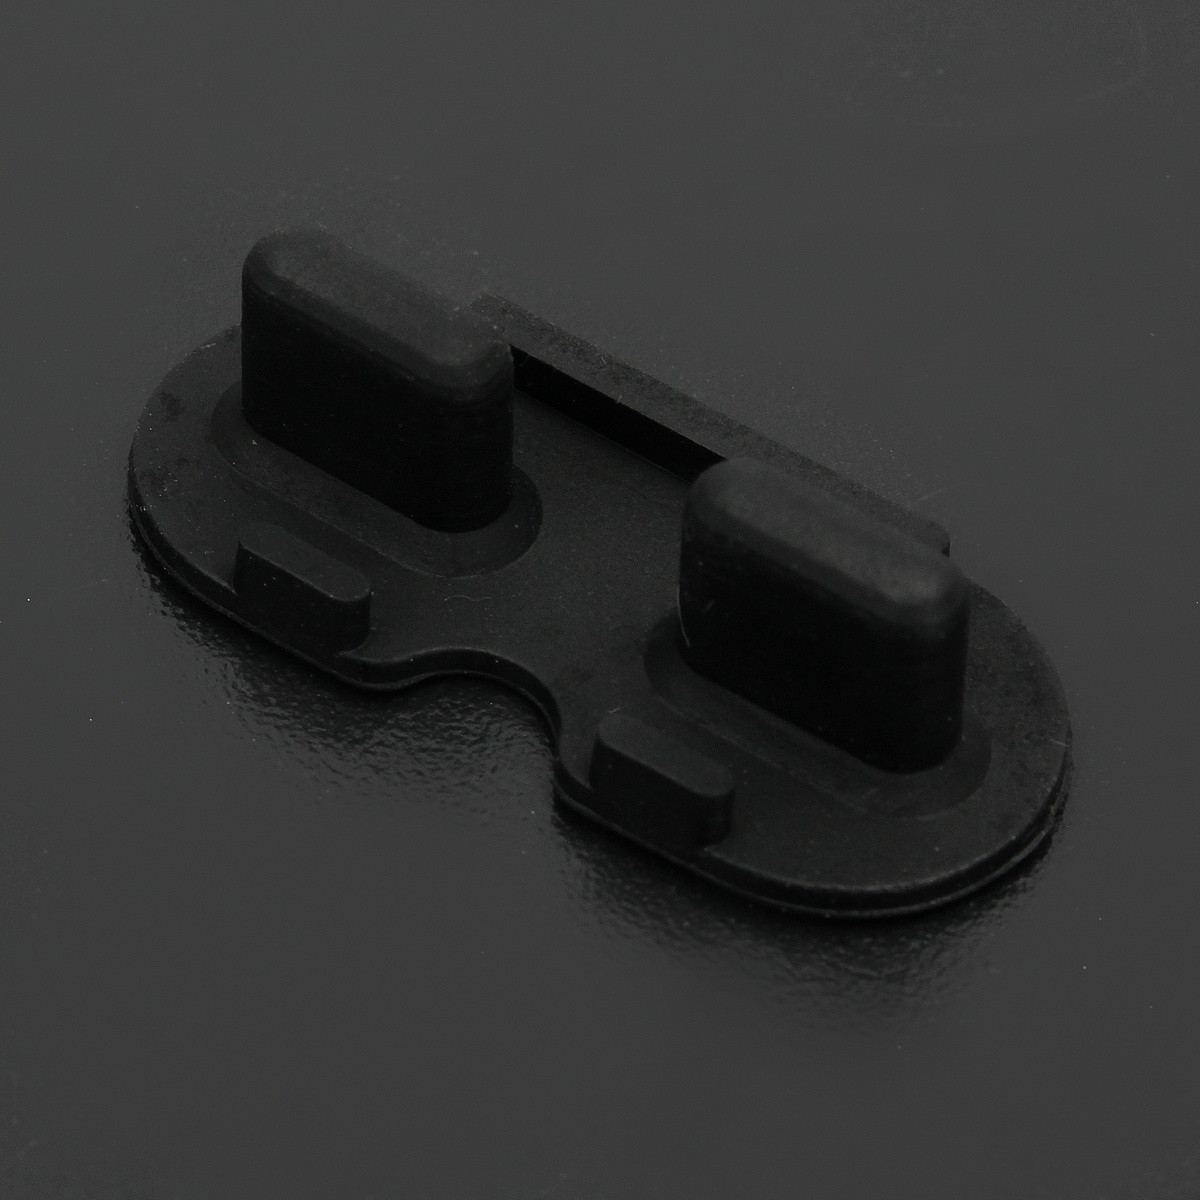 Silicon-Buttons-Replacement-Part-Rubber-for-Nintendo-NES-Game-Controller-Gamepad-1336659